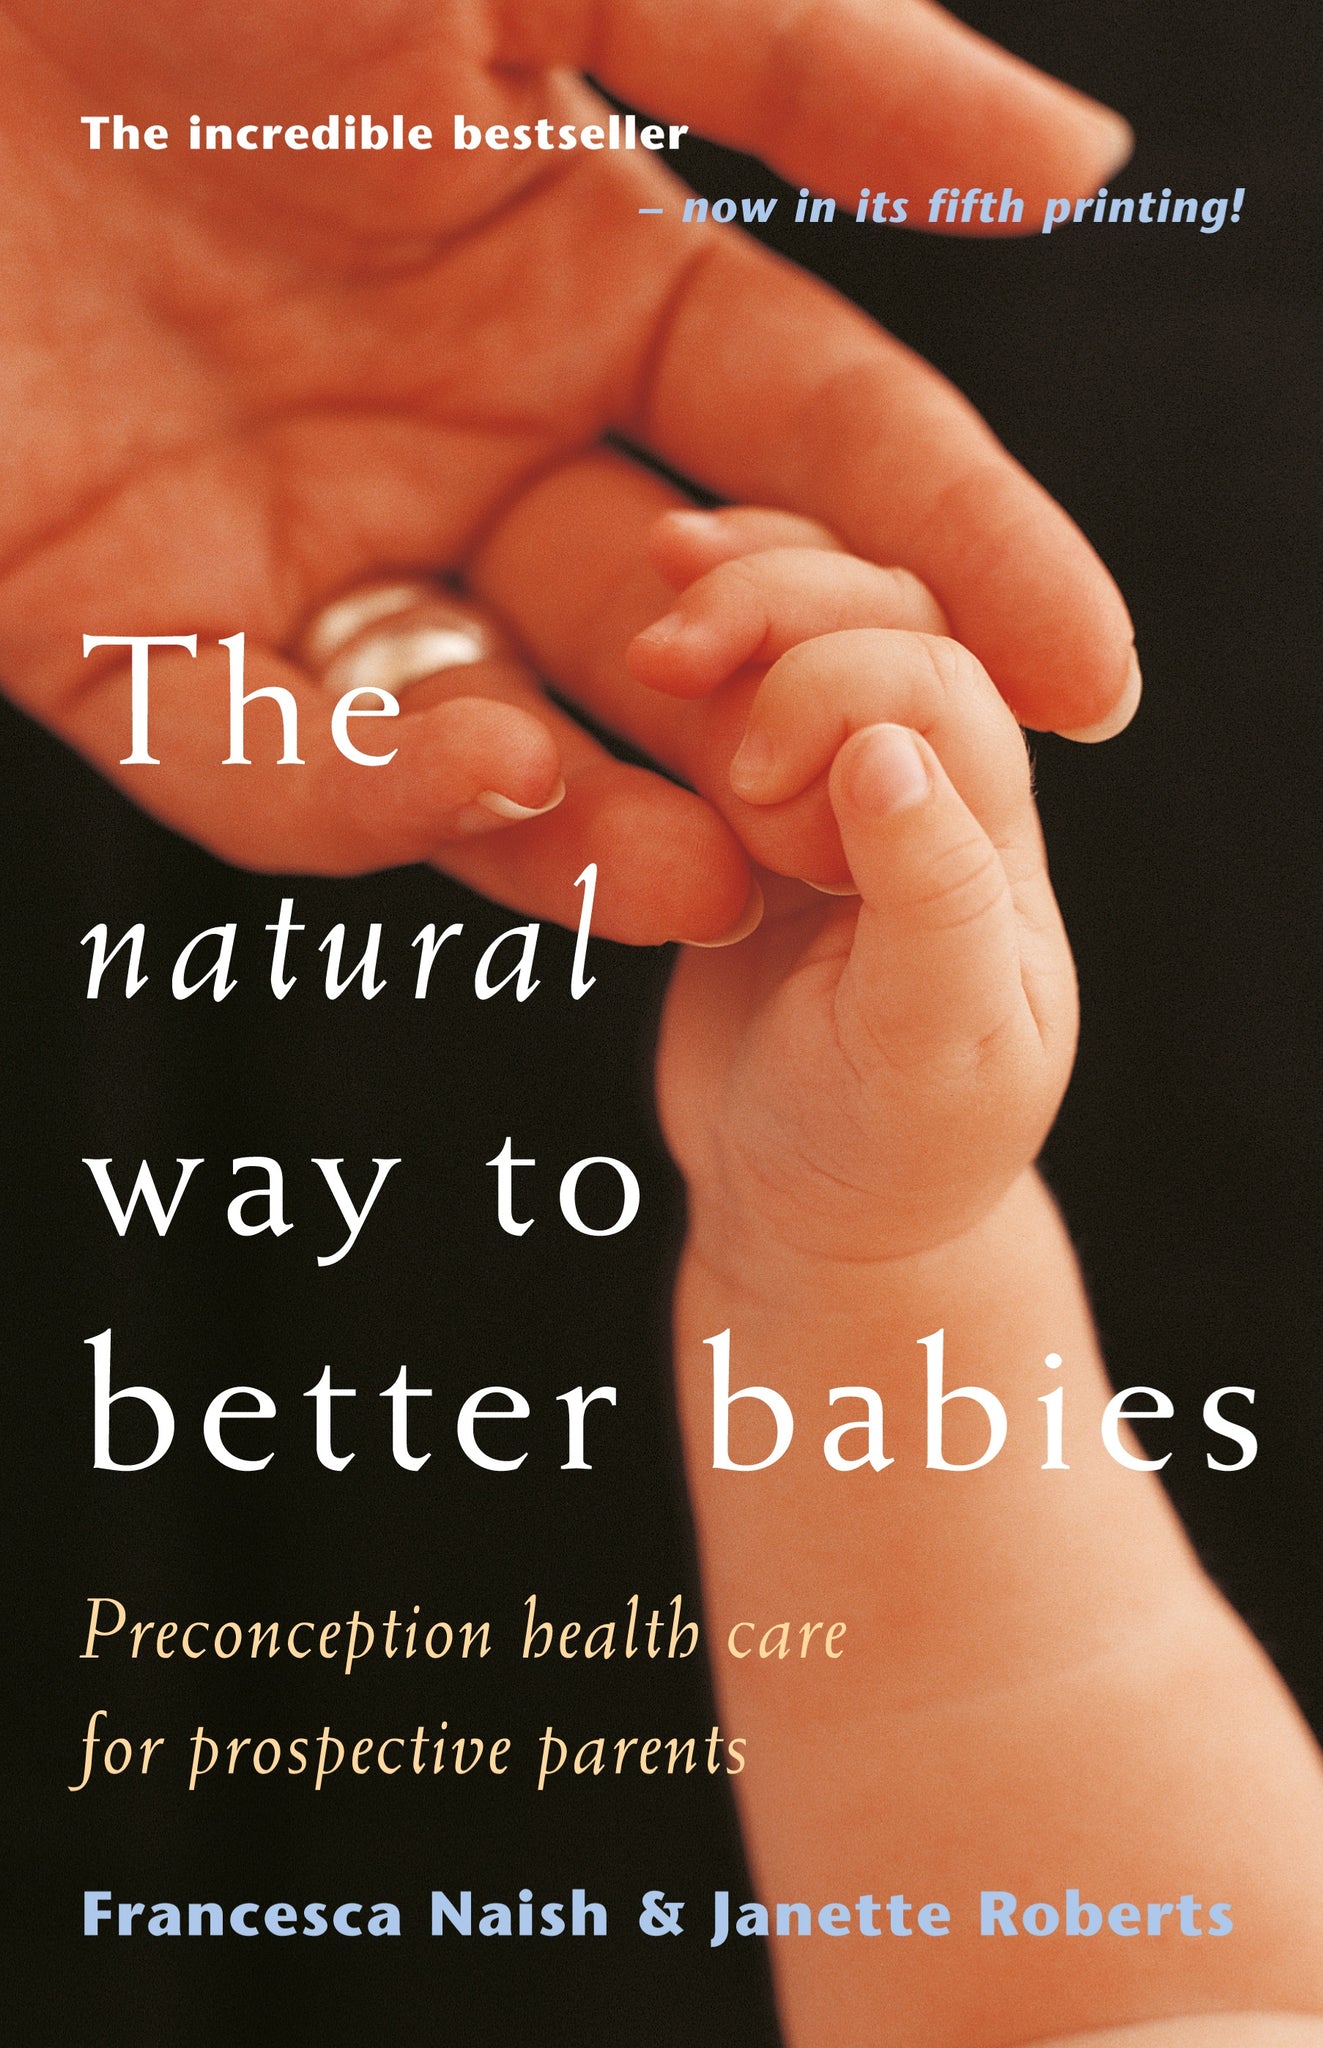 Natural Way to Better Babies by Francesca Naish & Janette Roberts